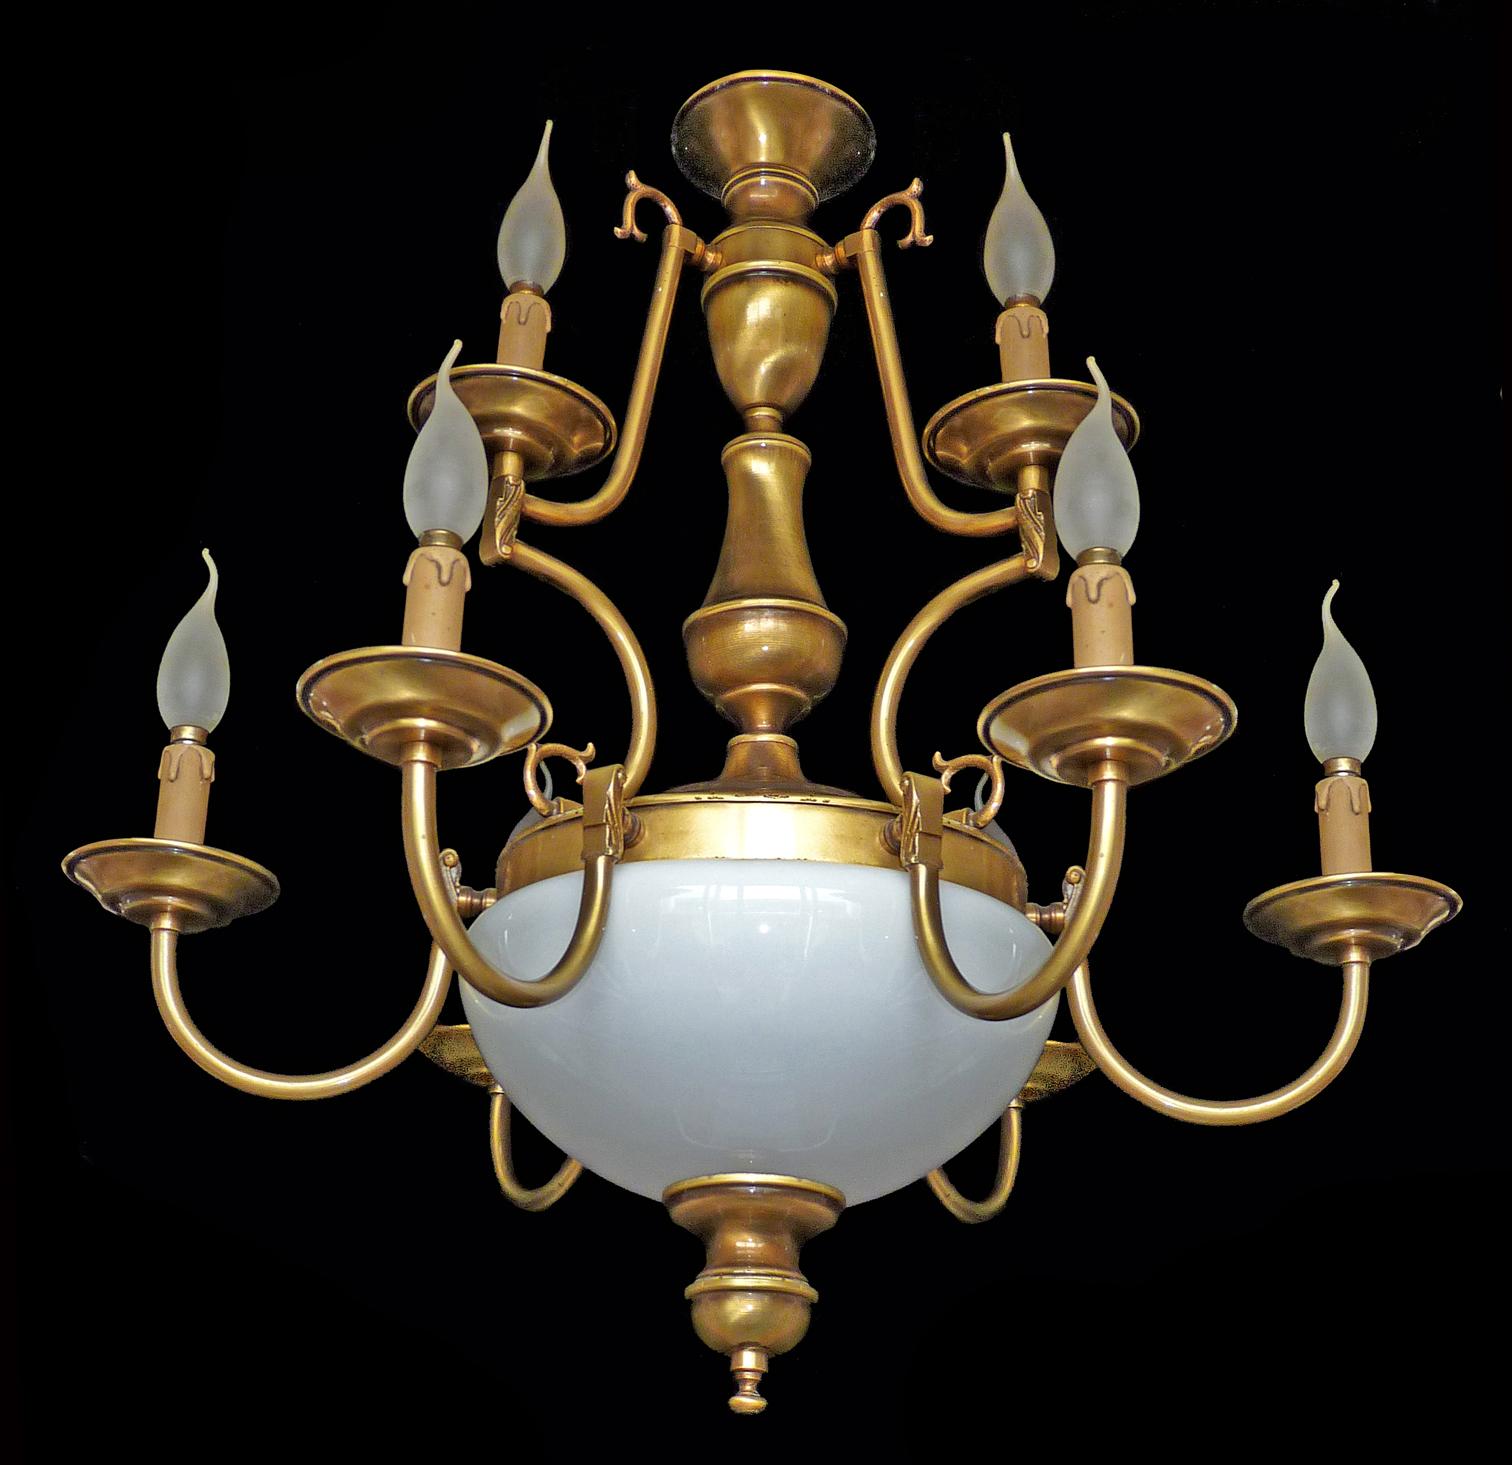 Gorgeous vintage French Art Deco and Deutsch style chandelier white opal glass, 12-light/ brass gold and bronze color with age patina
12-light bulbs E14 (6+3+3)
Good working condition
Measures:
Diameter 27.6 in / 70 cm
Height 27.6 in / 70 cm
Bowl 12